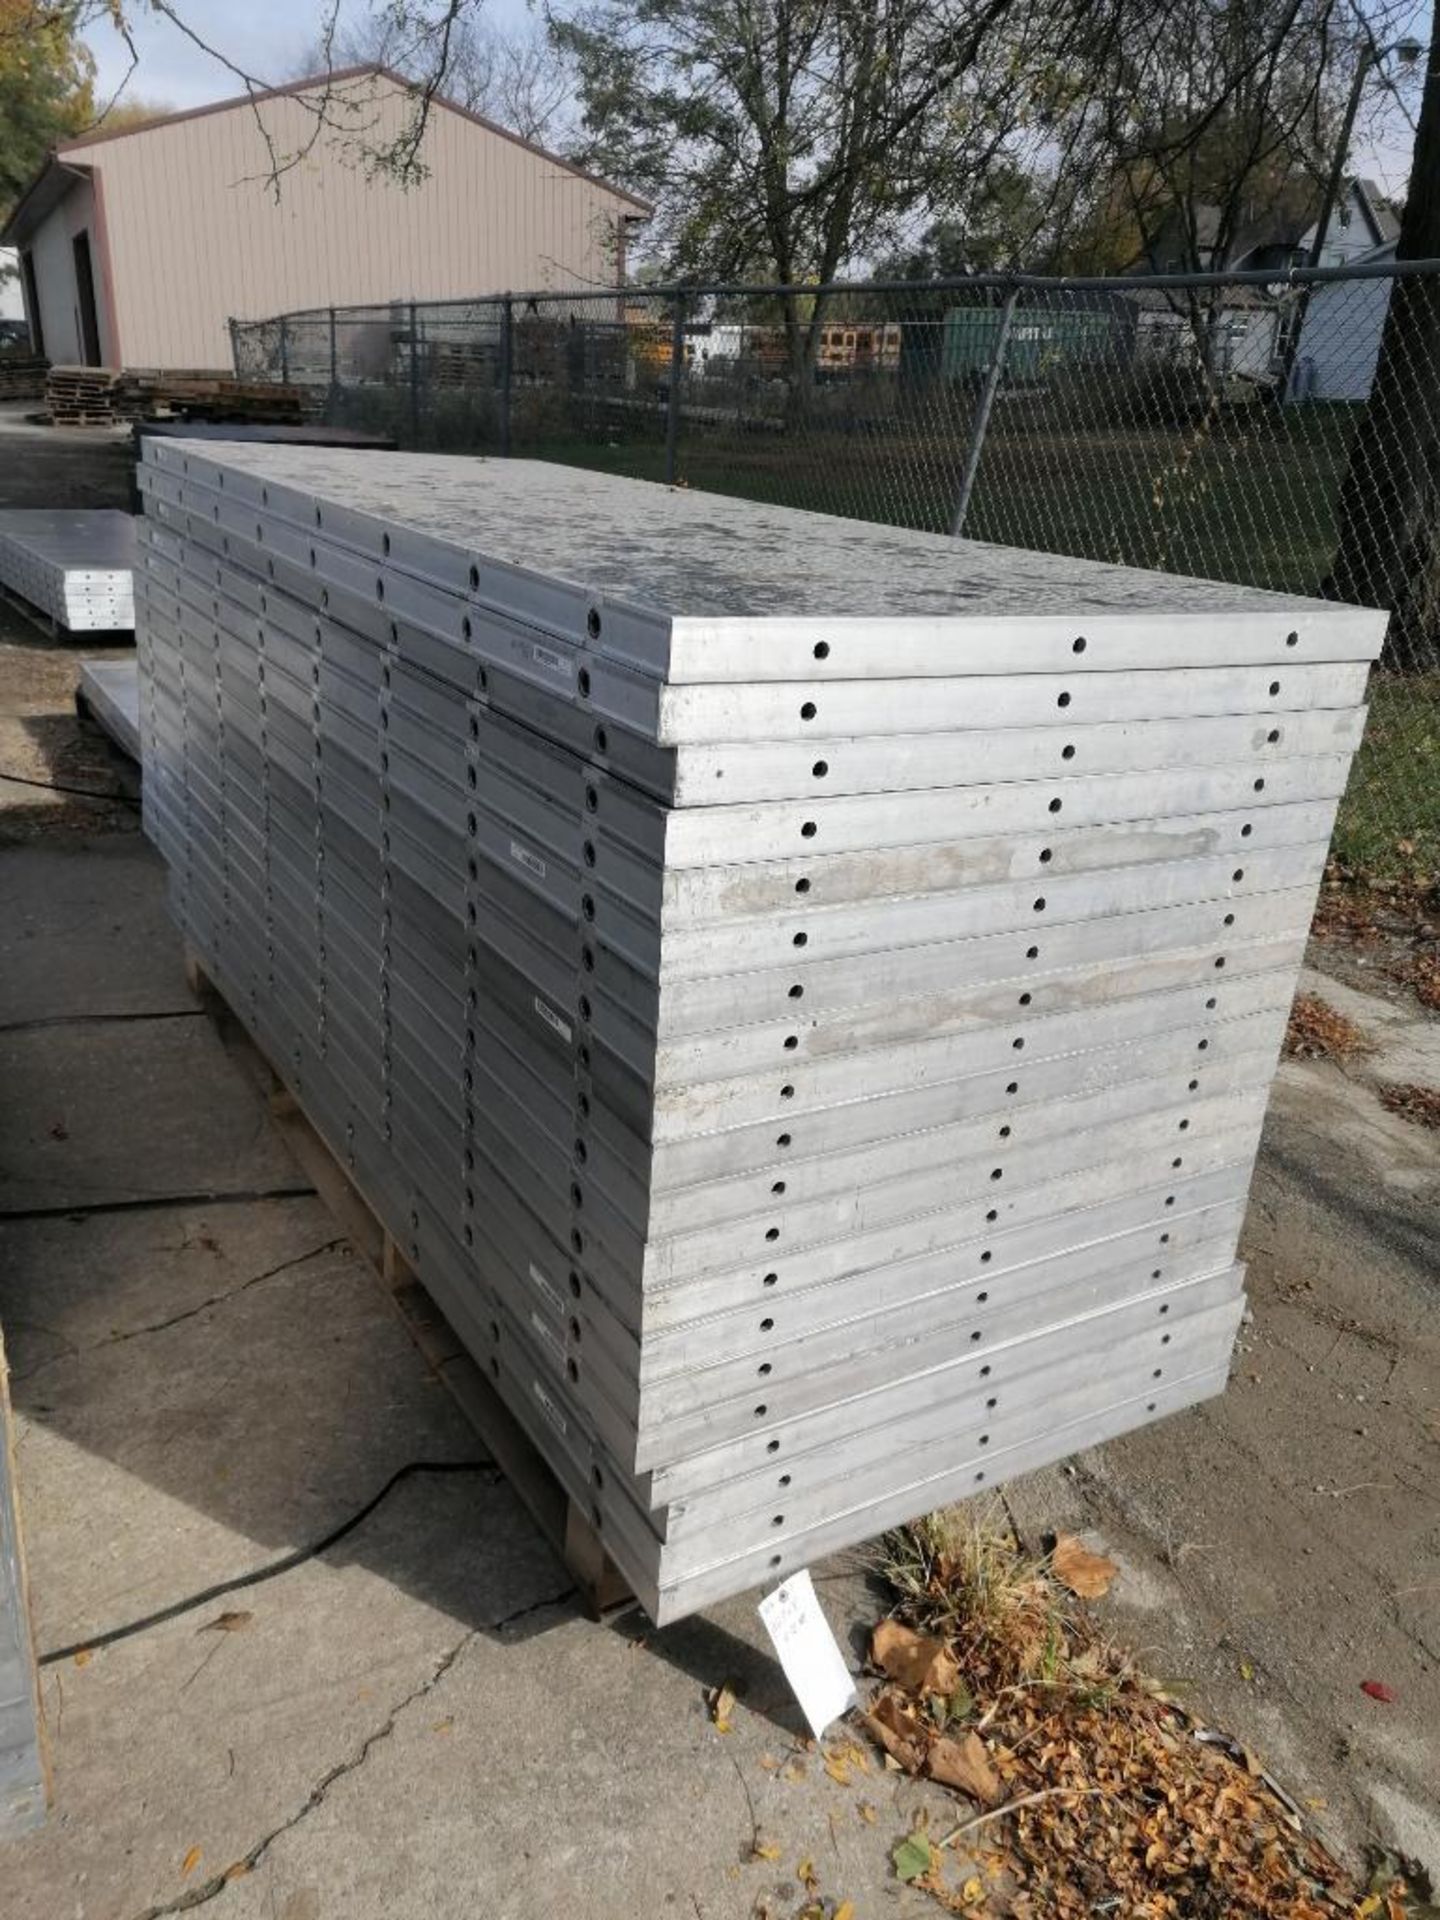 (20) 36" x 8' NEW Badger Smooth Aluminum Concrete Forms 6-12 Hole Pattern. Located in Mt.